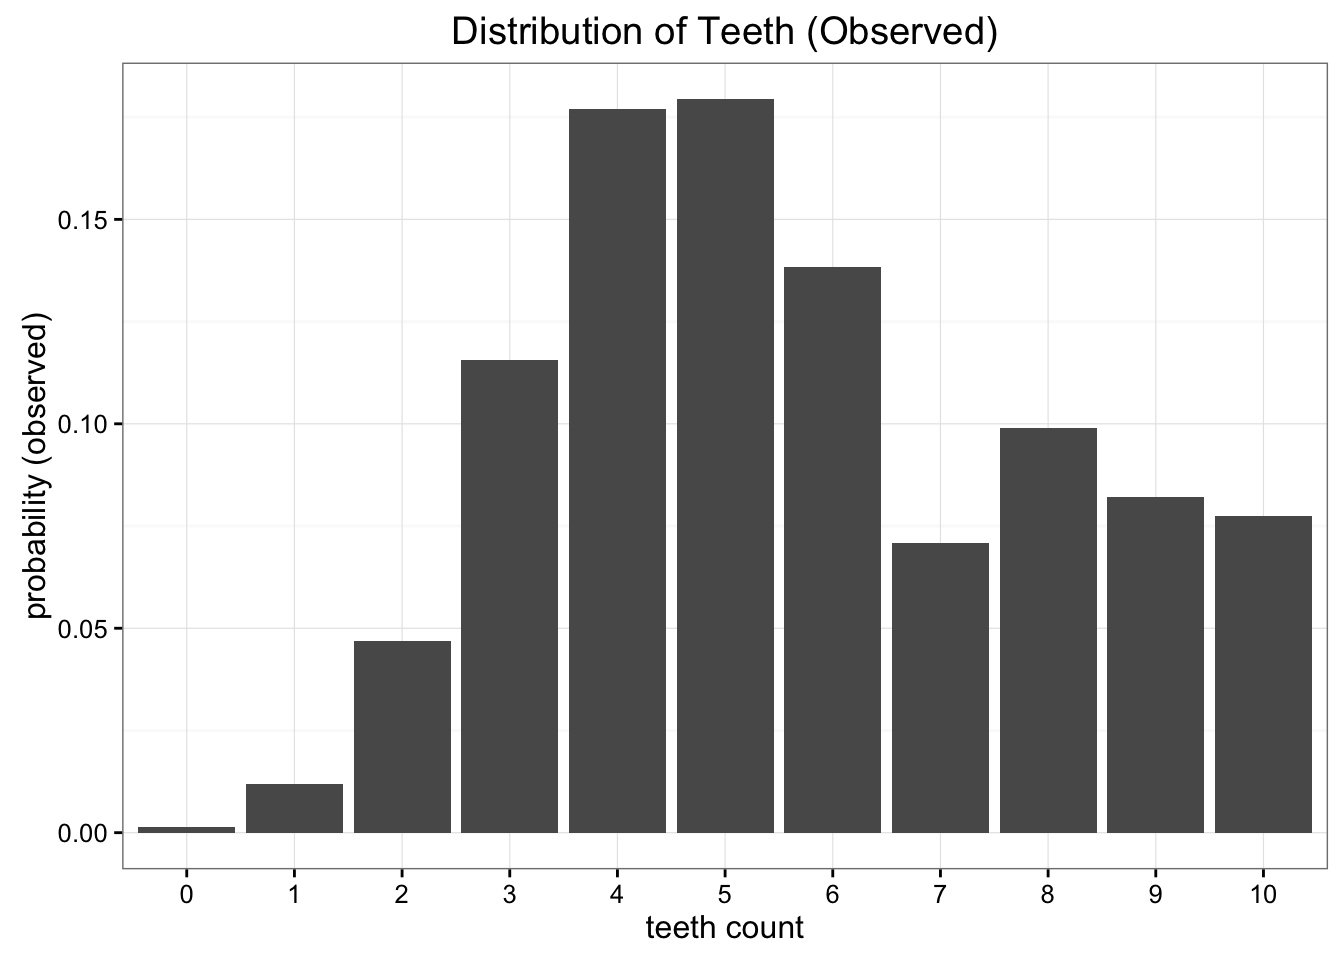 The empirical probability distribution of the data collected